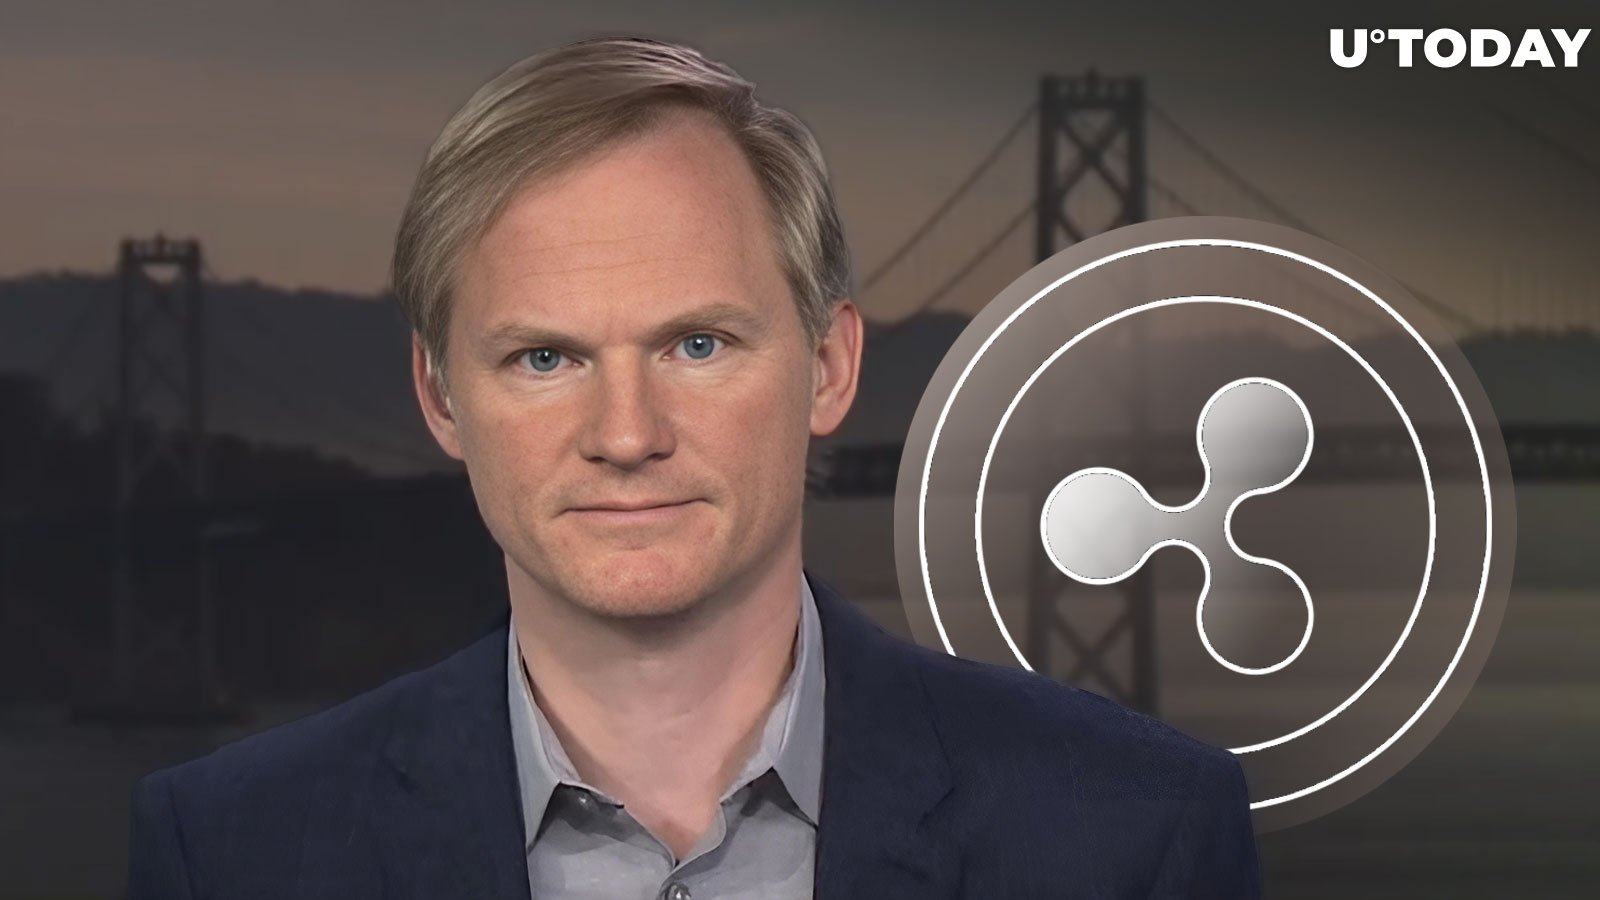 BitGo CEO Reveals Why He Wants Ripple to Win